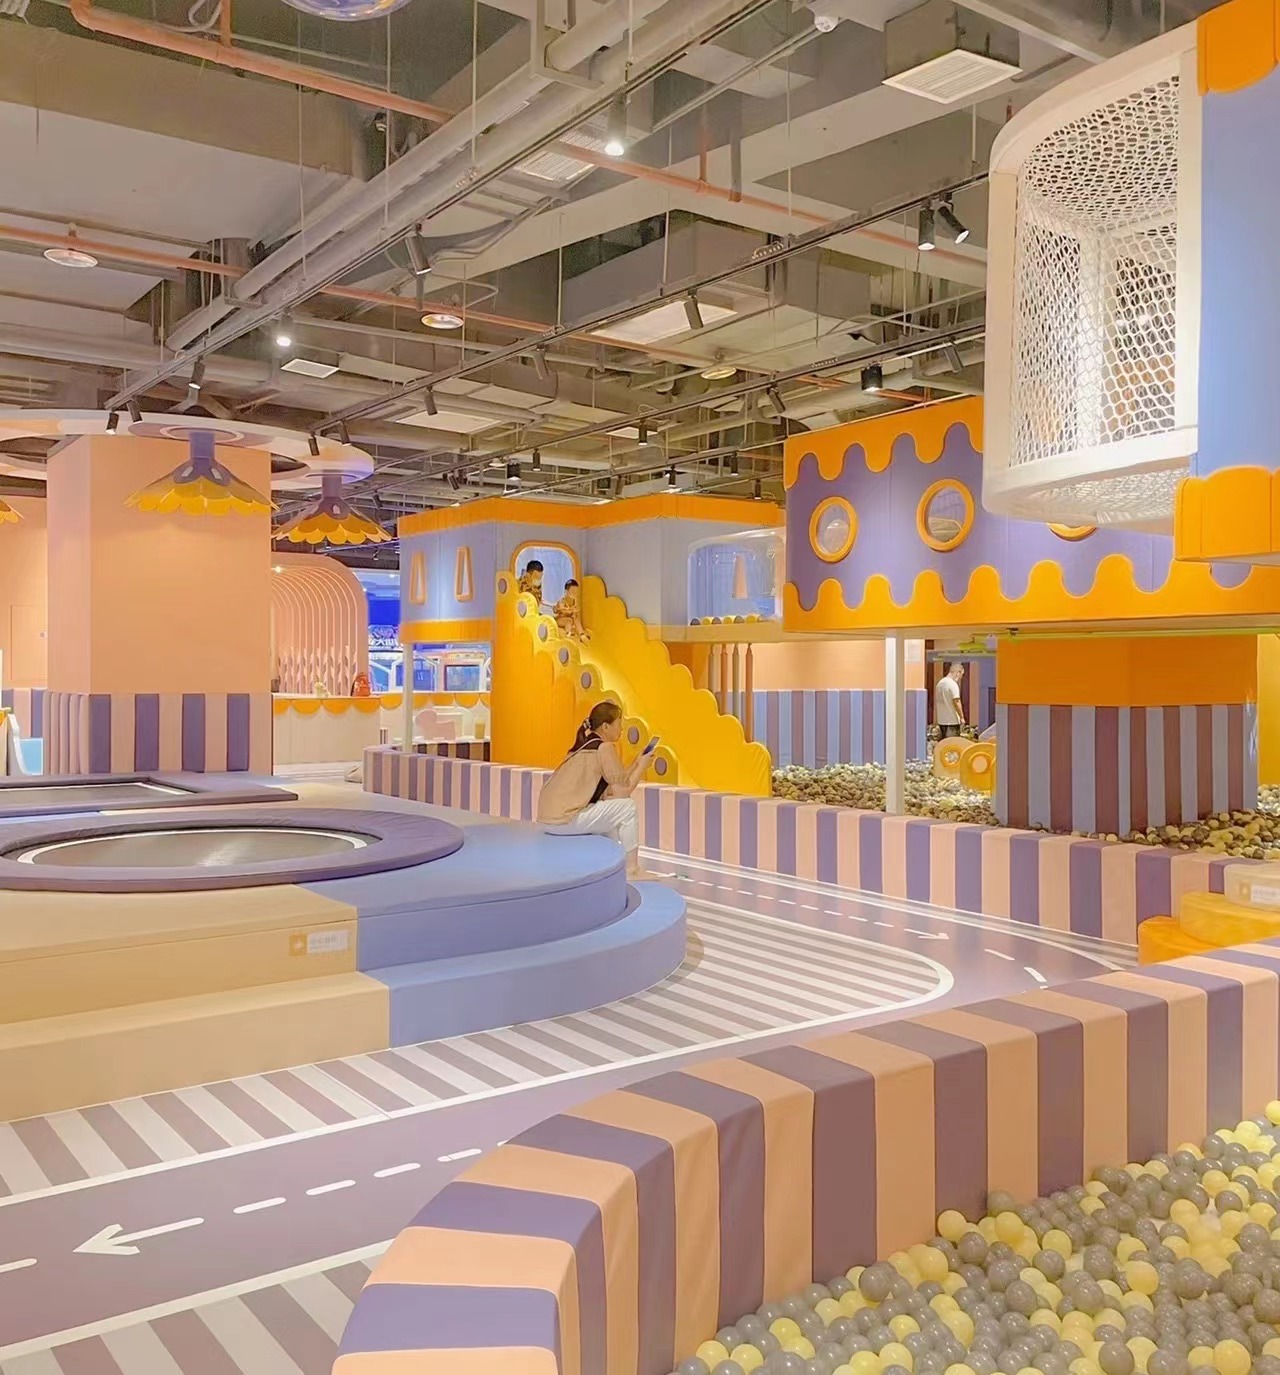 How much does it cost to open a small indoor playground?